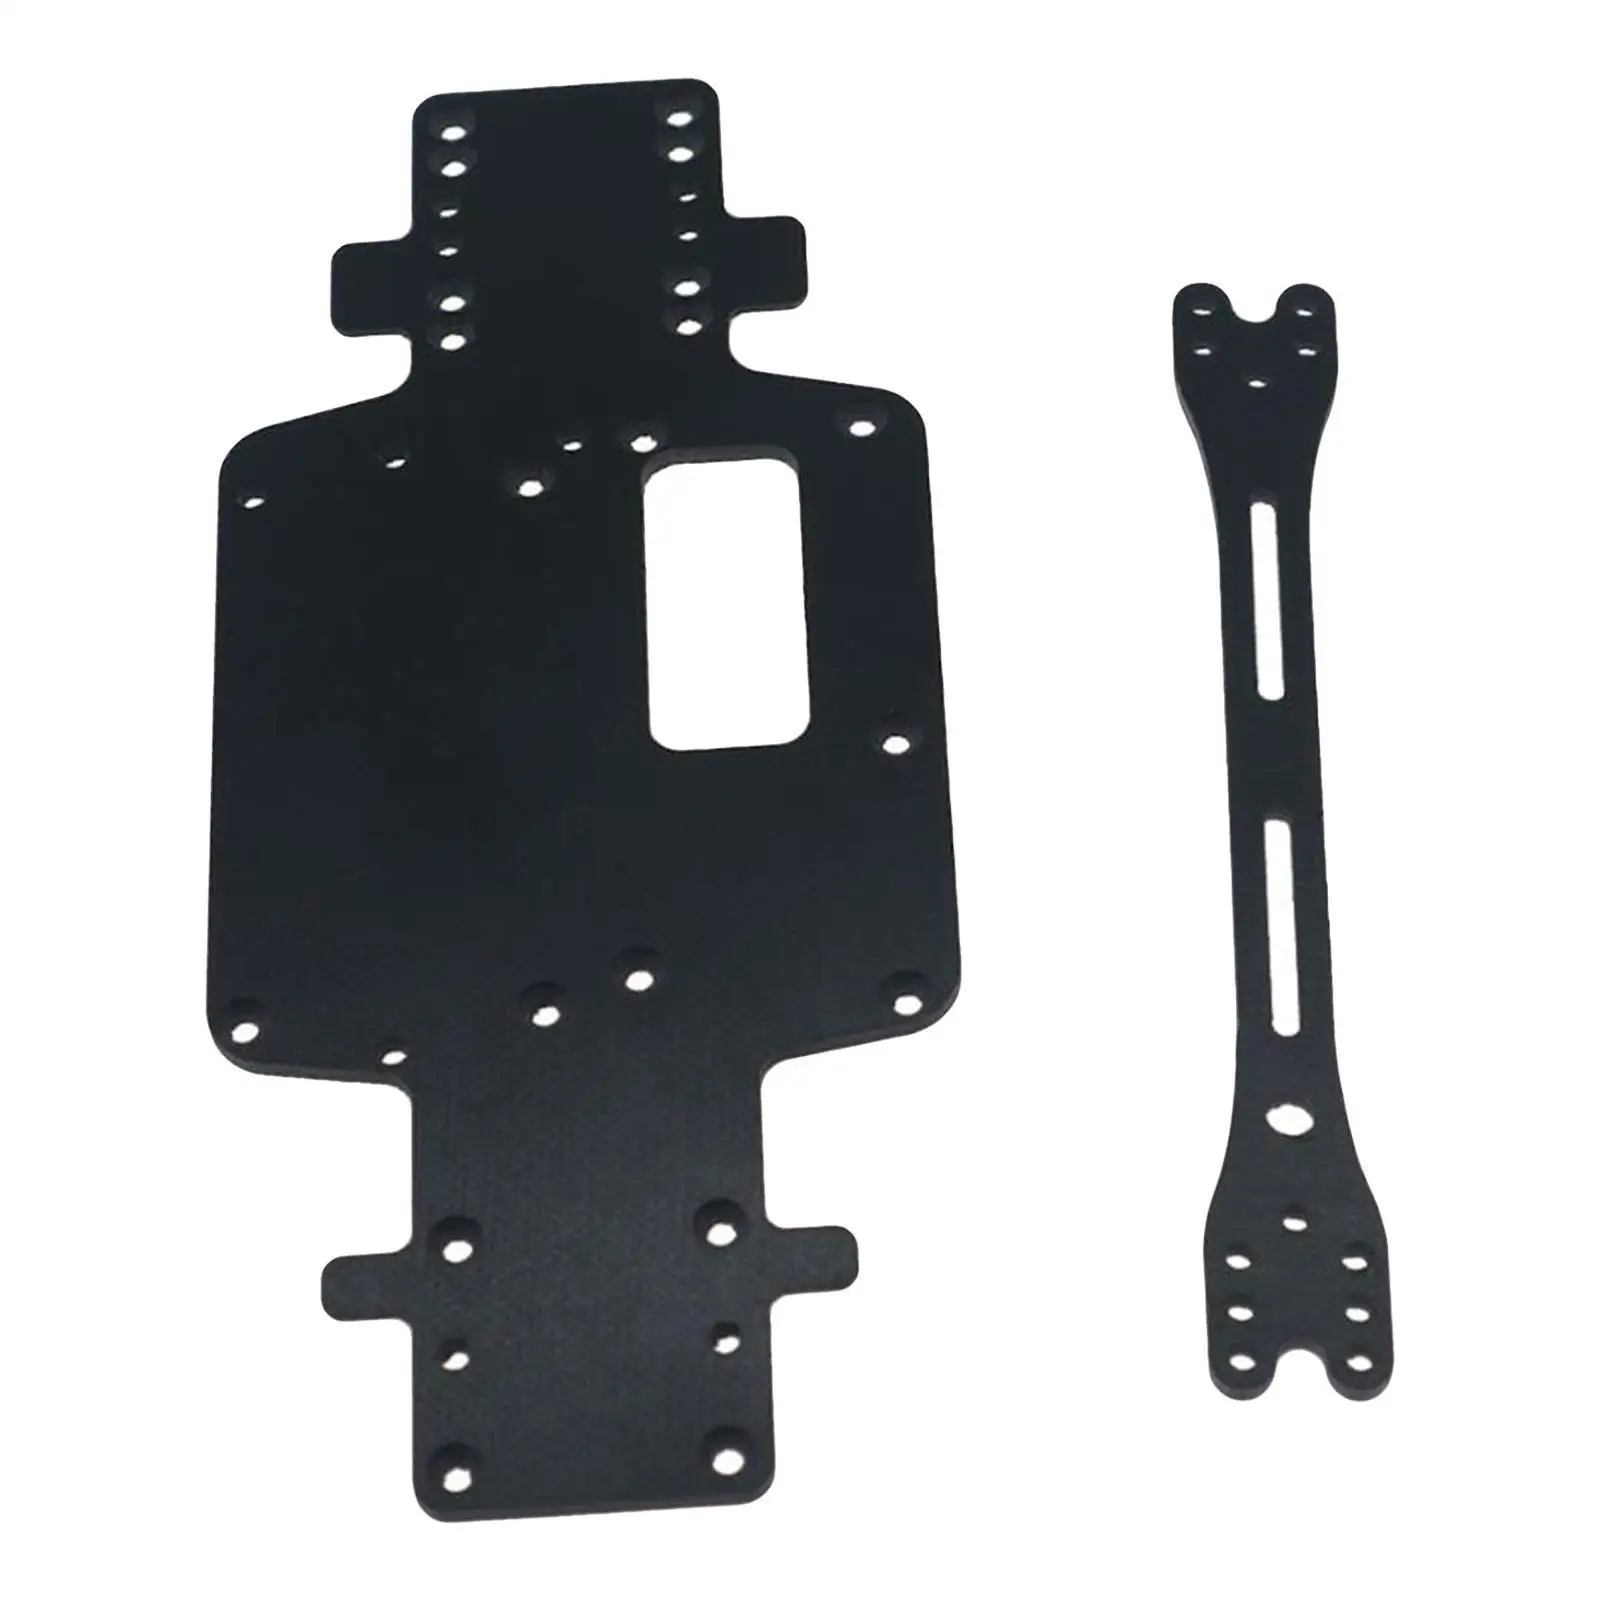 RC Car Chassis Body Plate Fit for Wltoys K969 K989 P929 1/28 Scale RC Car